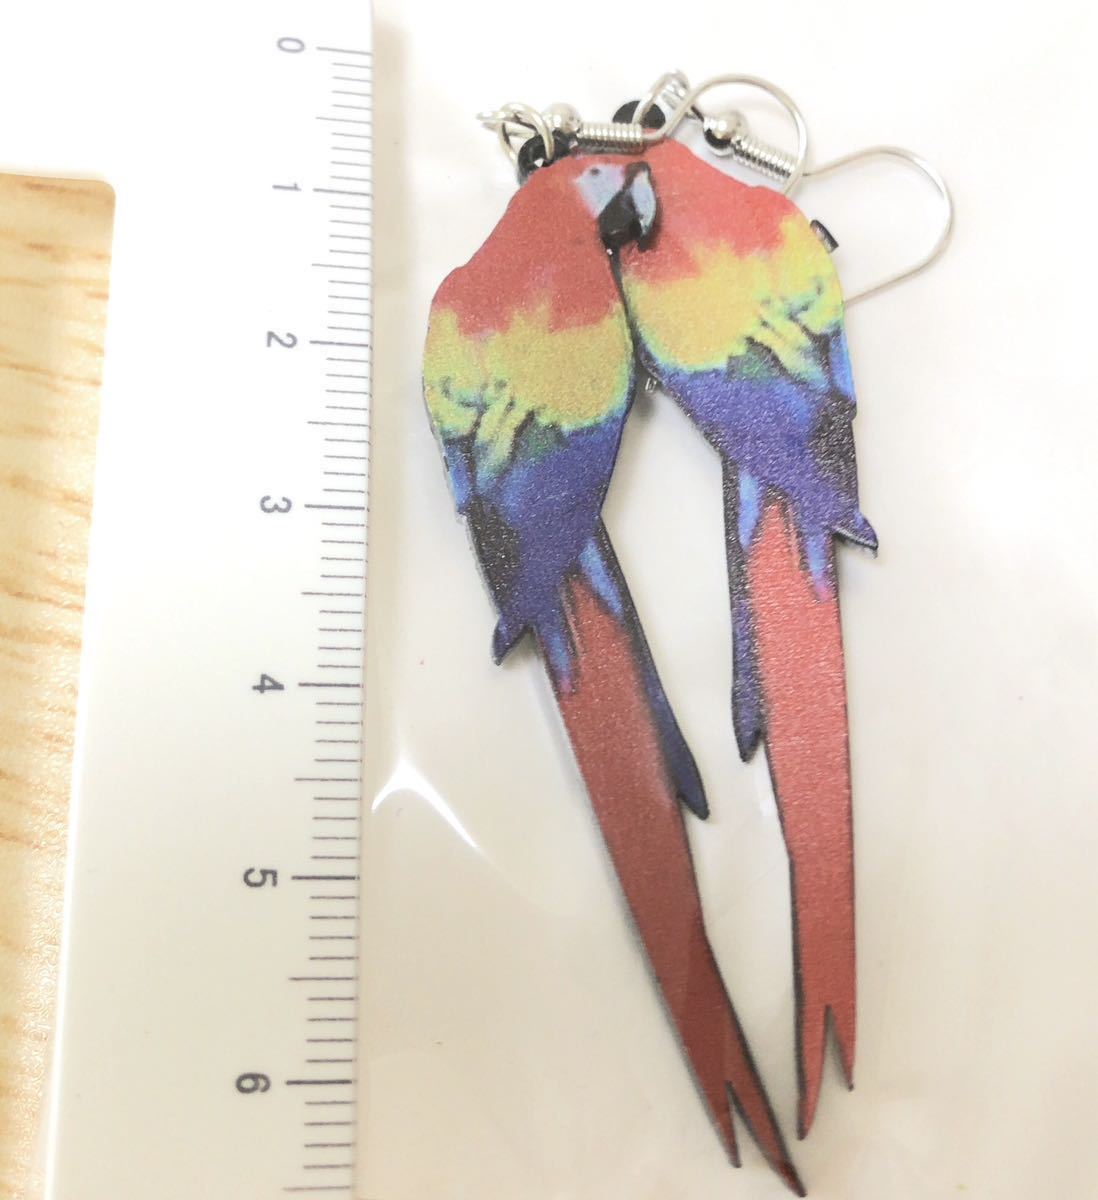 [ new goods ] navy blue go in coin ko parrot earrings goods accessory collection colorful ... light weight bird animal unusual 